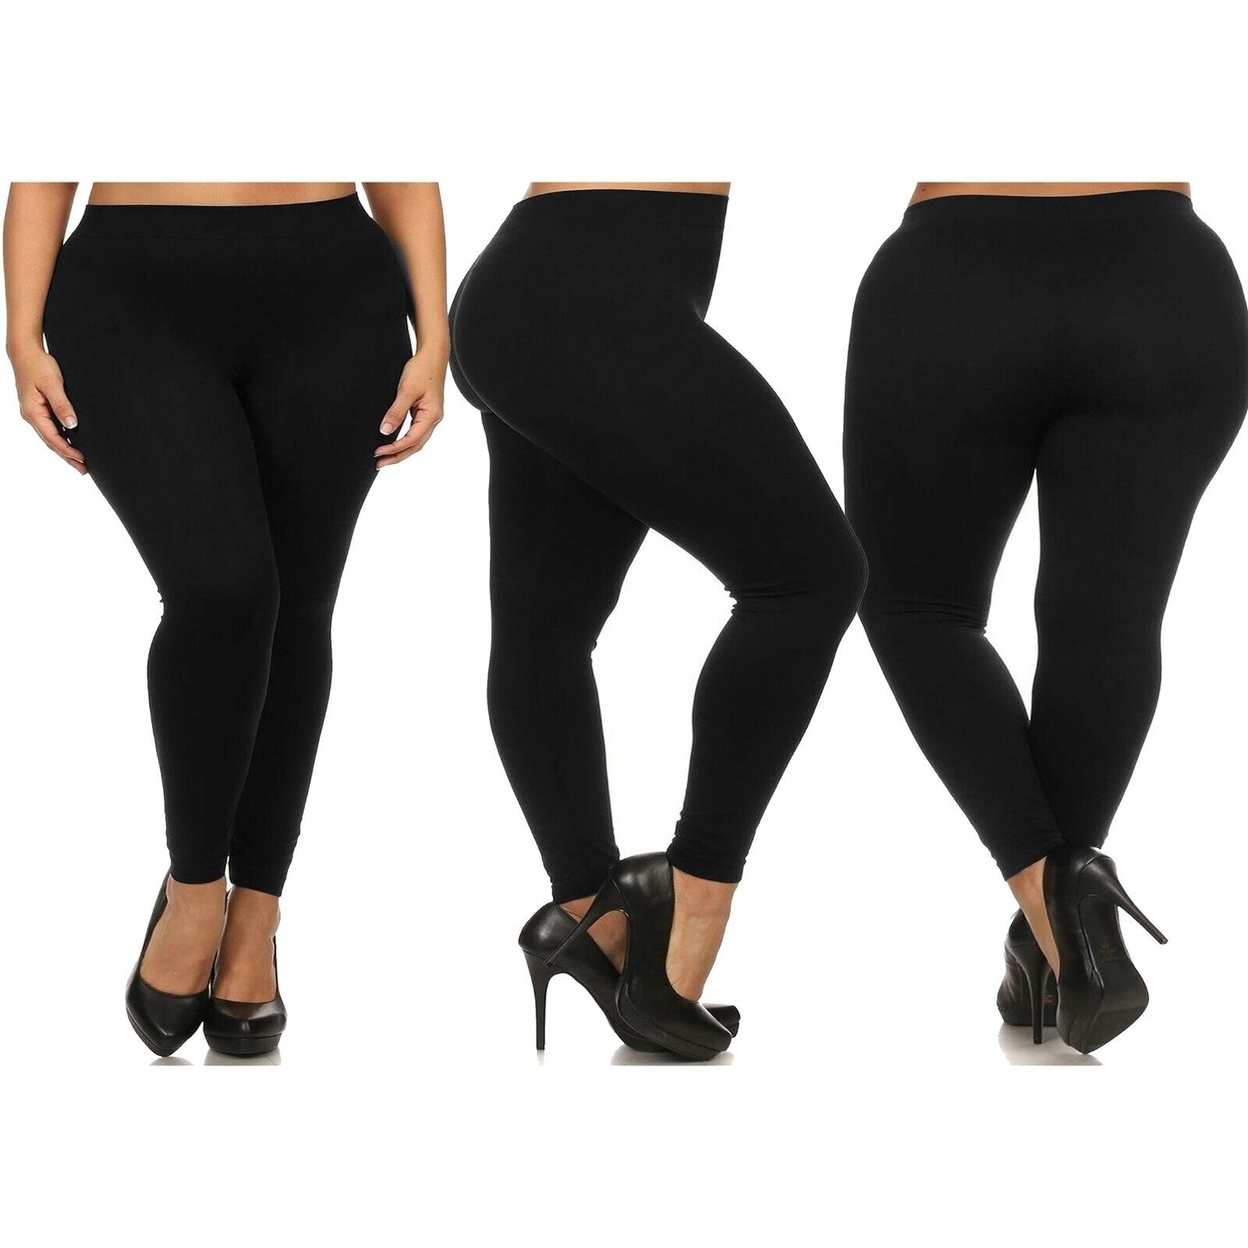 3-Pack: Women's Casual Ultra-Soft Smooth High Waisted Athletic Active Yoga Leggings Plus Size Available - Black,black,black, 3x